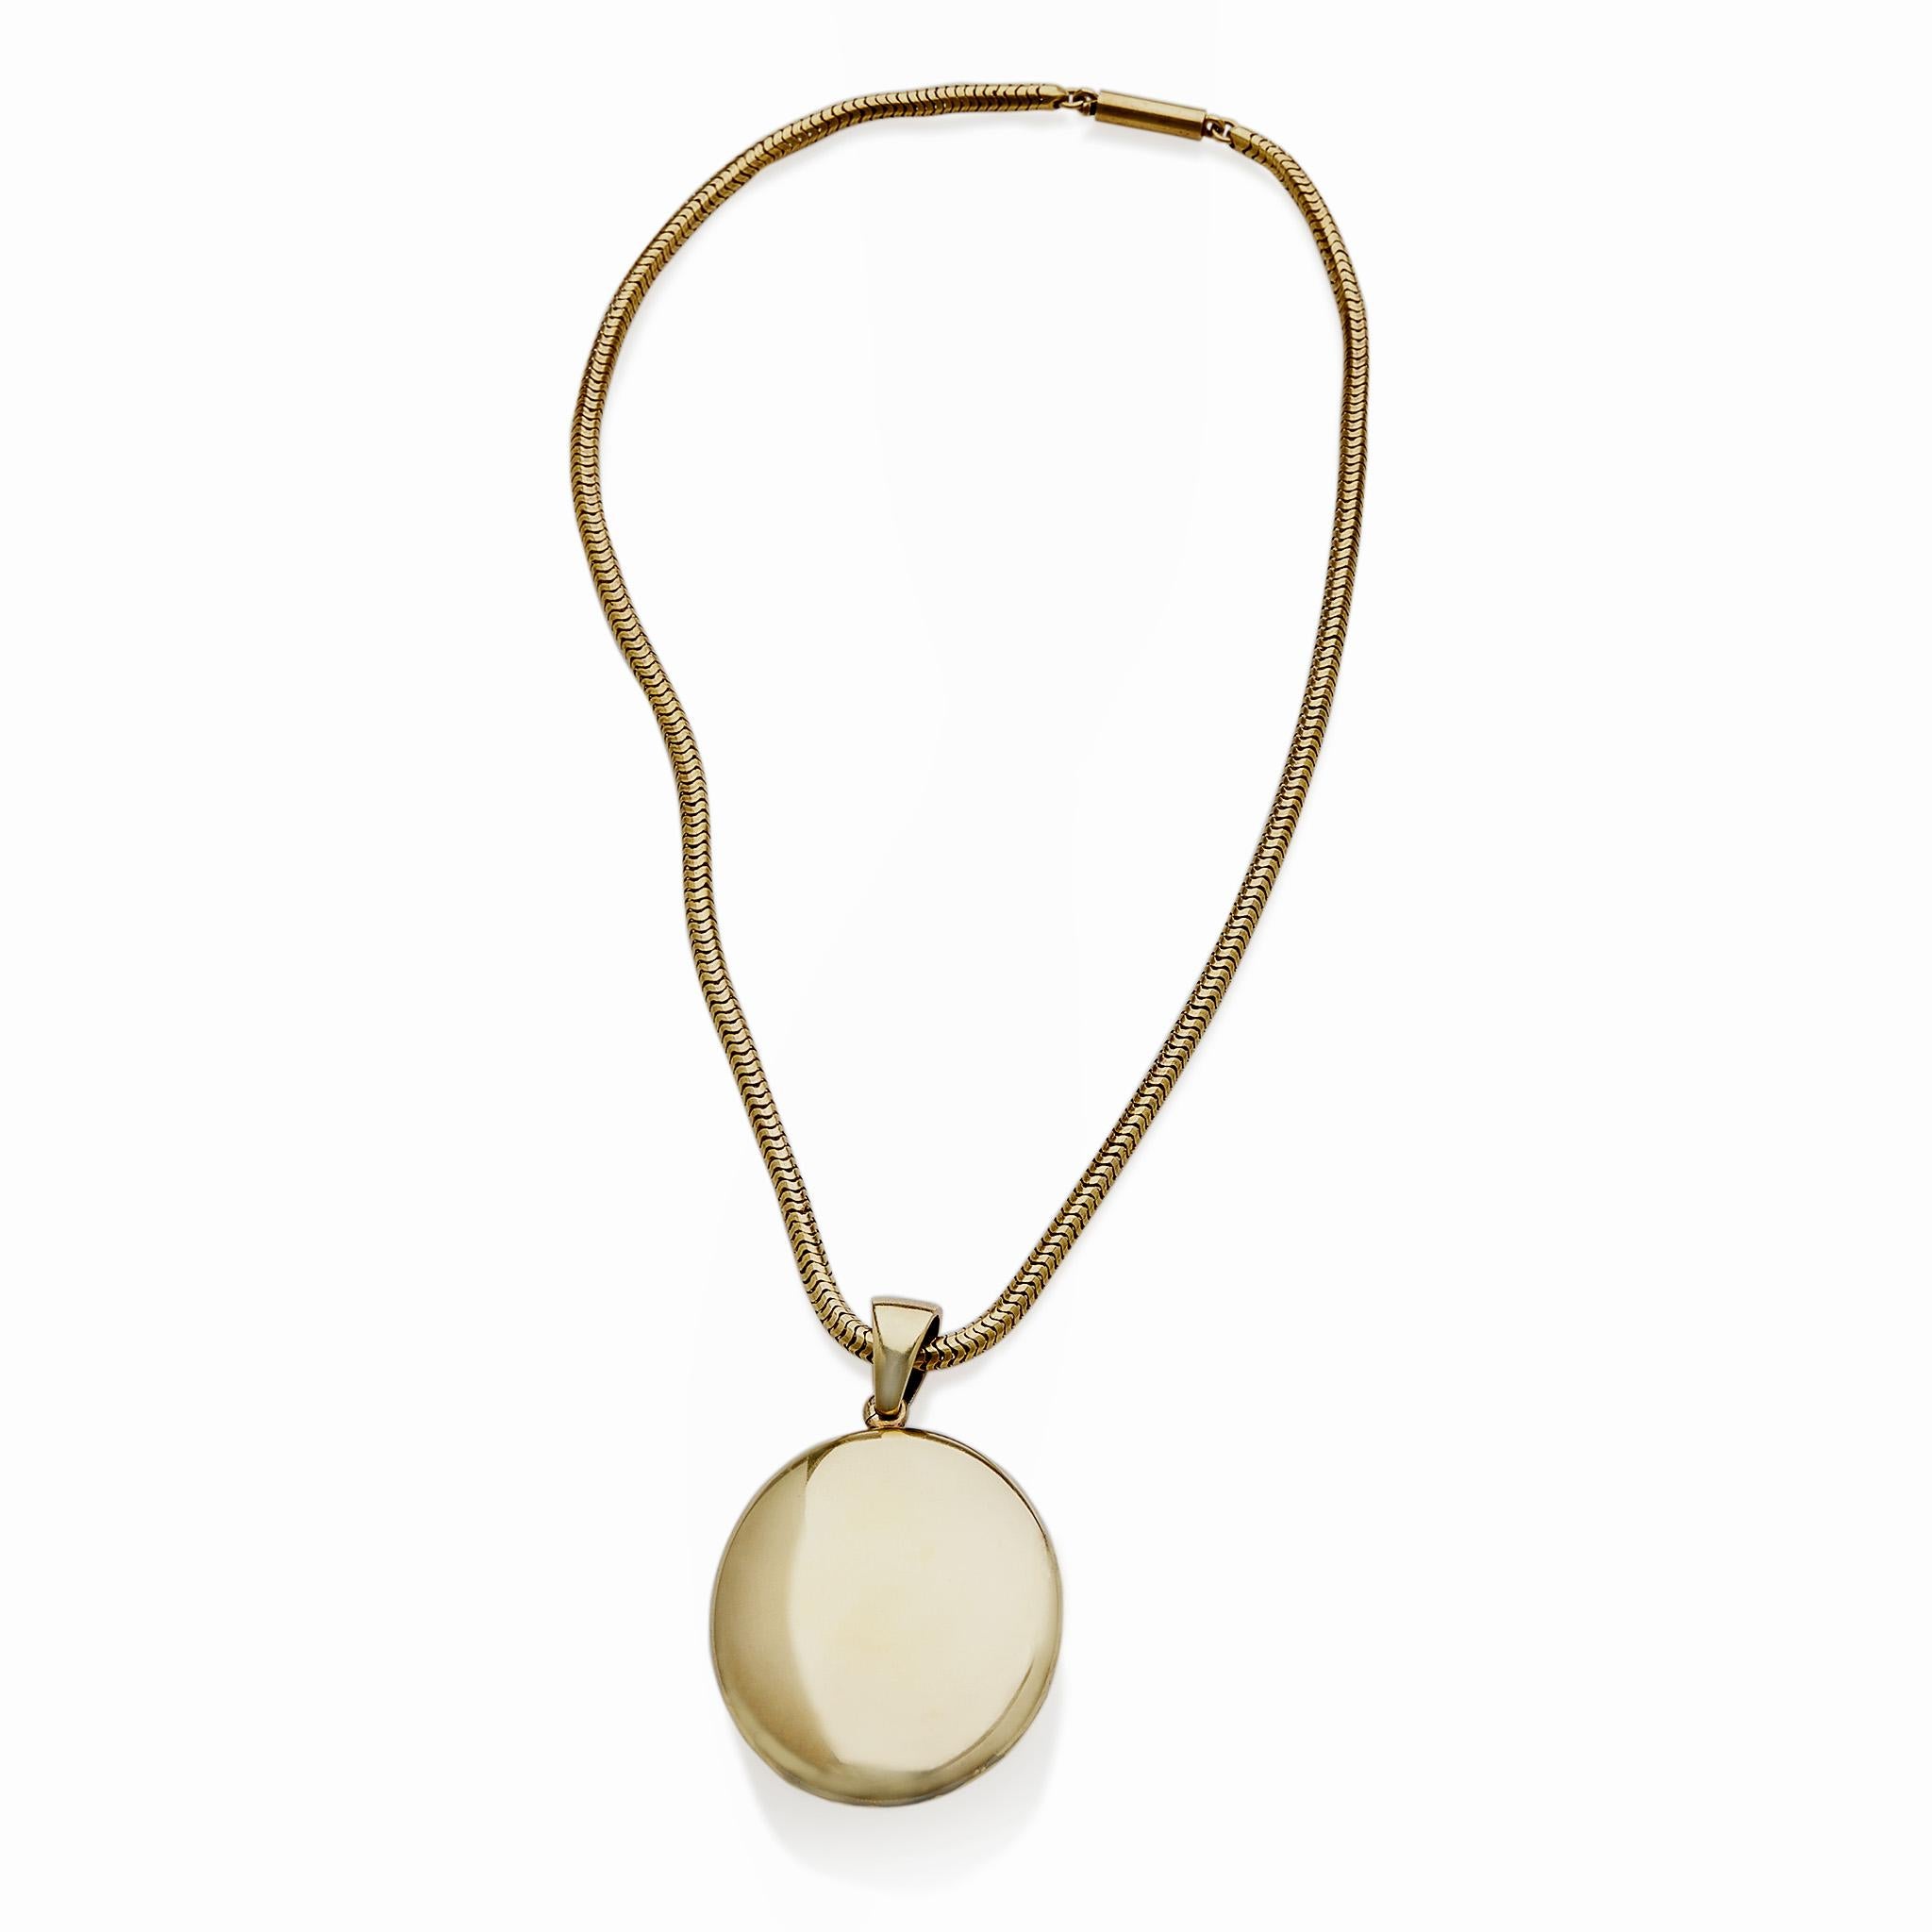 Women's or Men's Bloomed Gold, Pearl and Diamond Locket Necklace with Snake Chain